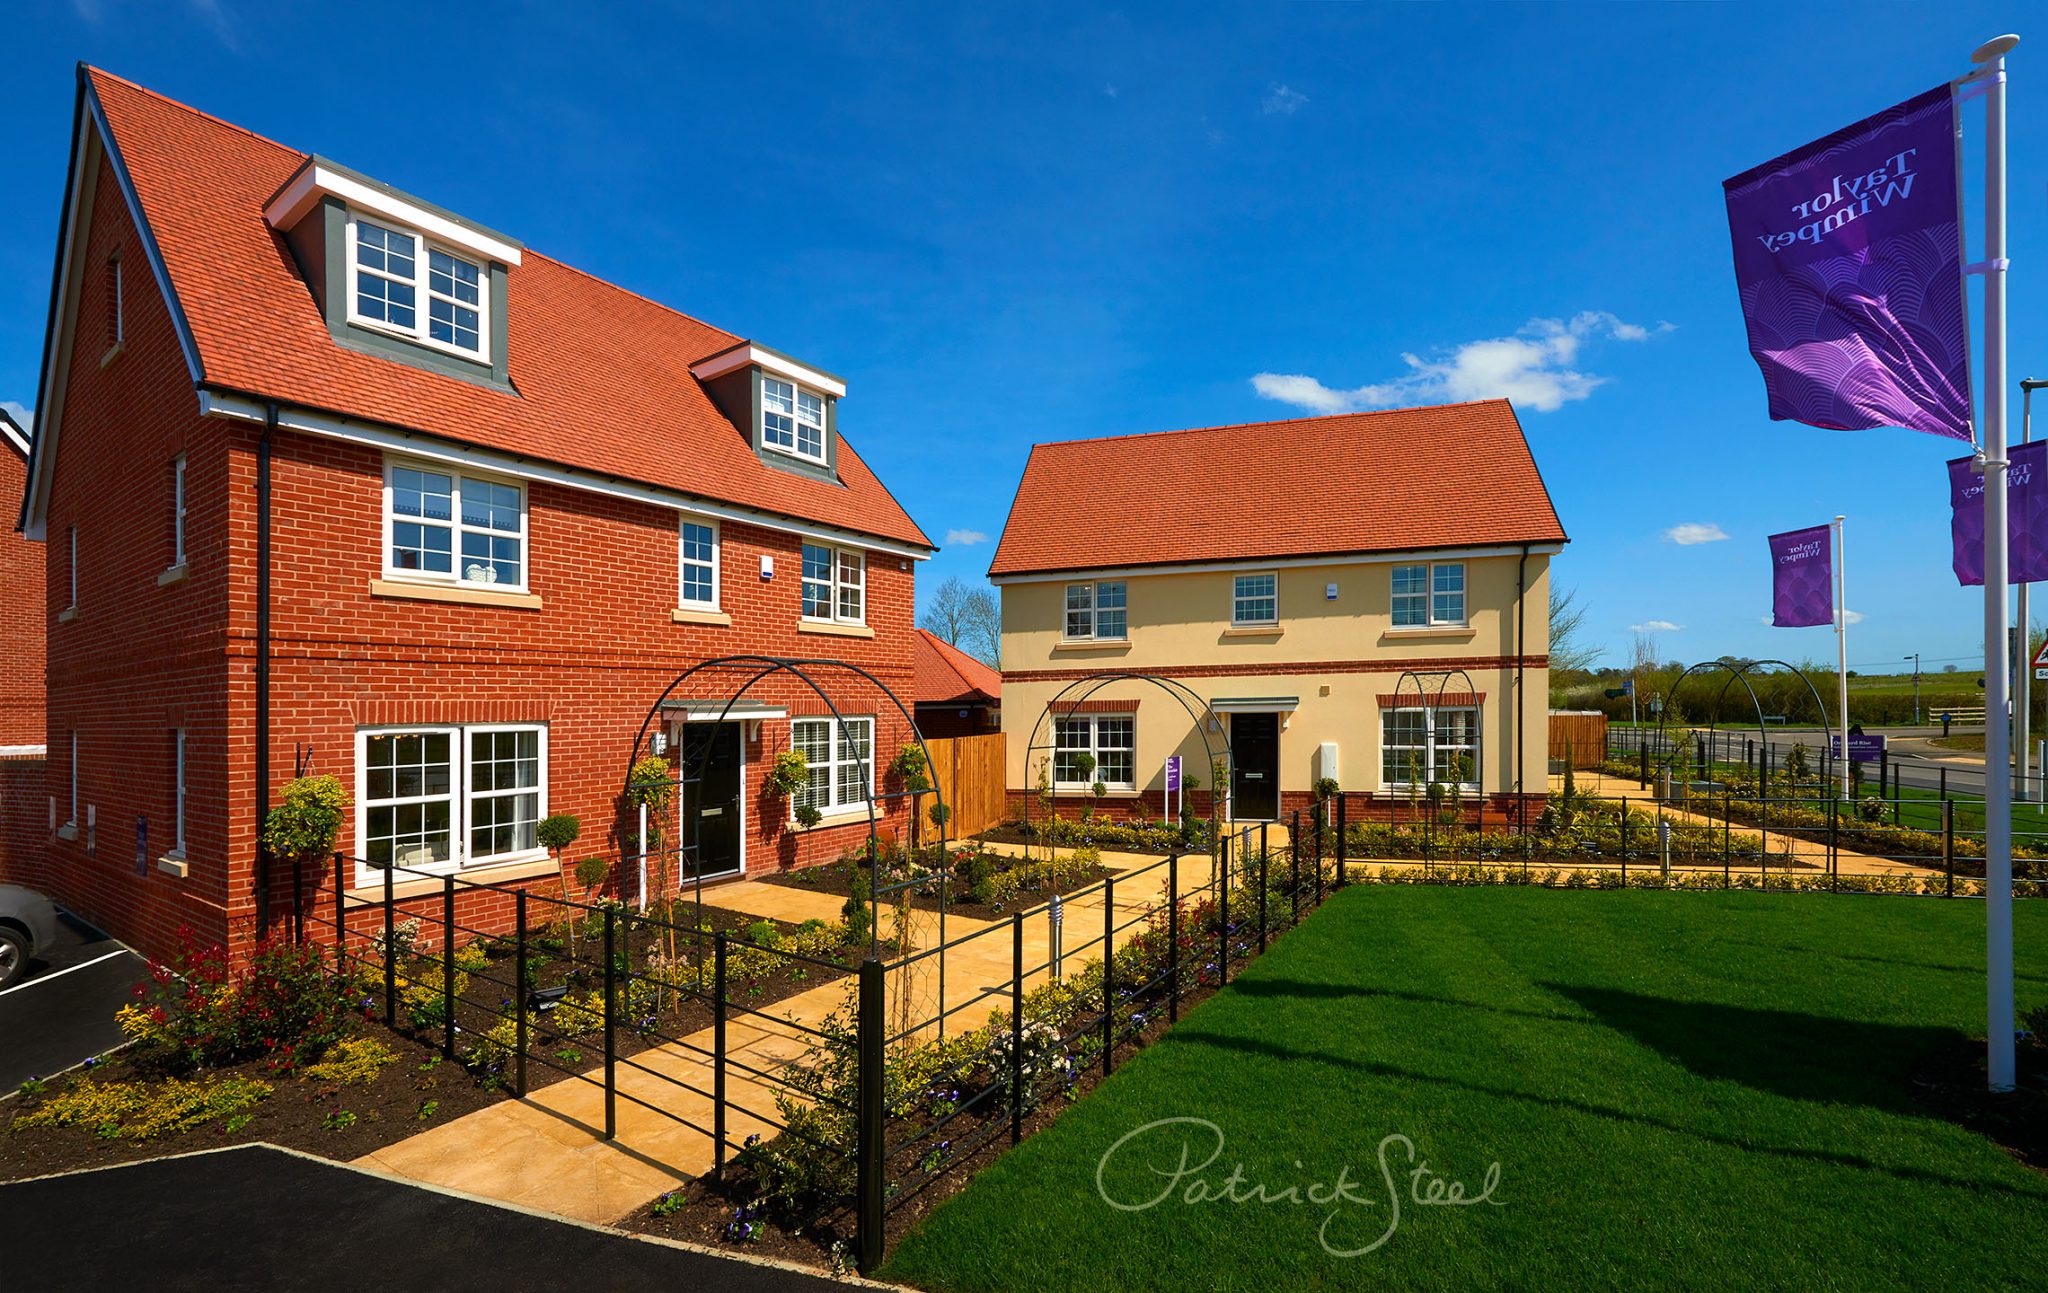 Mr Steel | Orchard Rise | Taylor Wimpey